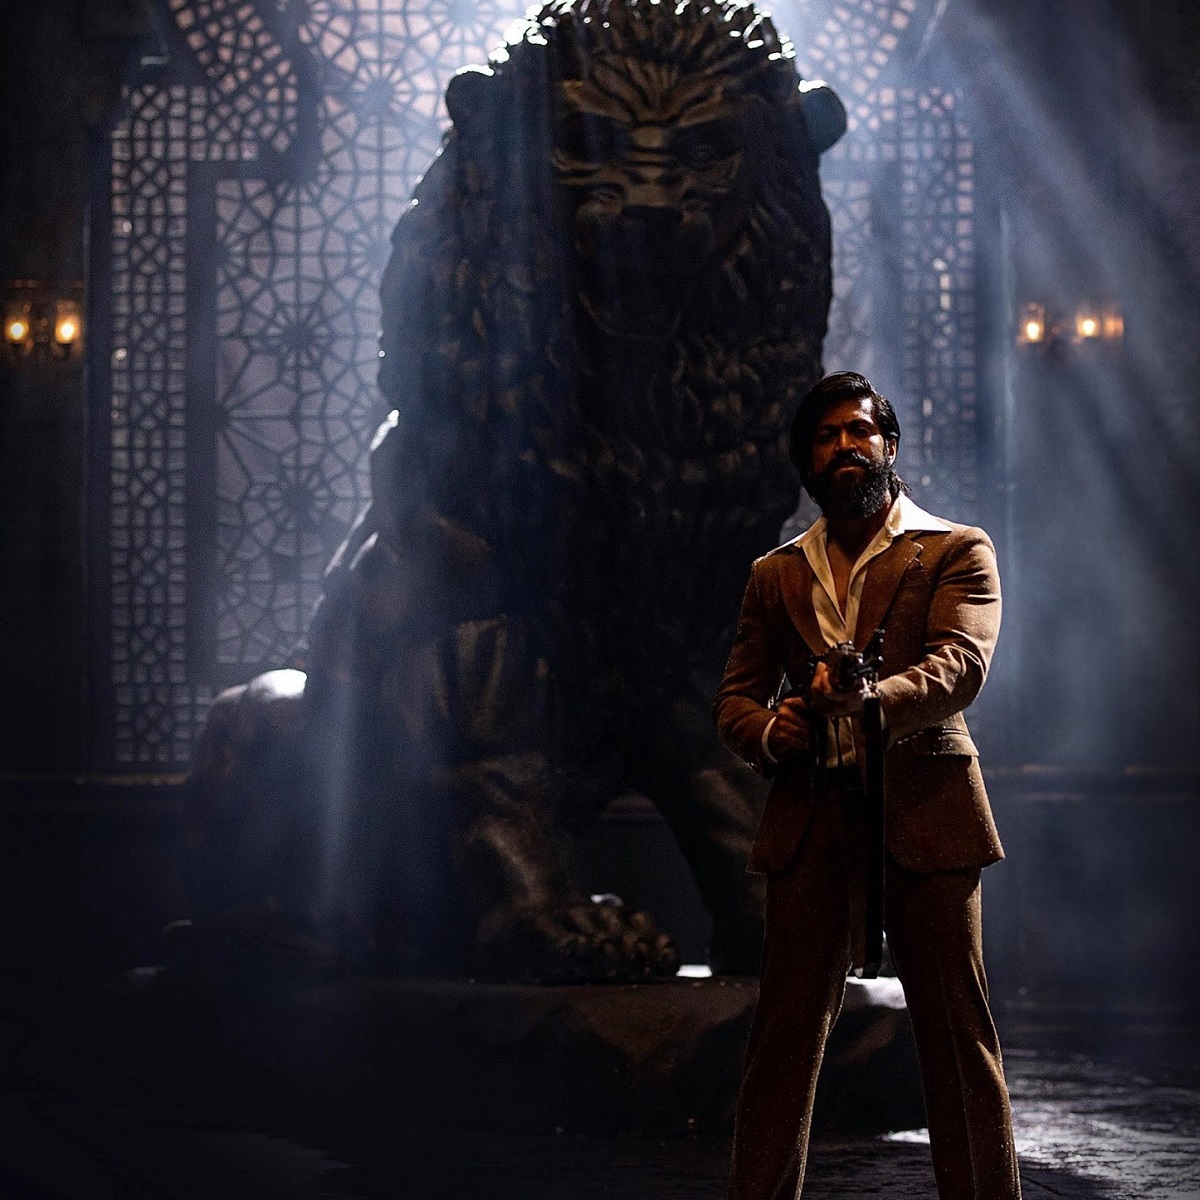 KGF Chapter 2 India Saturday Box Office; Yash starrer tops Rs. 300 crores in 3 days